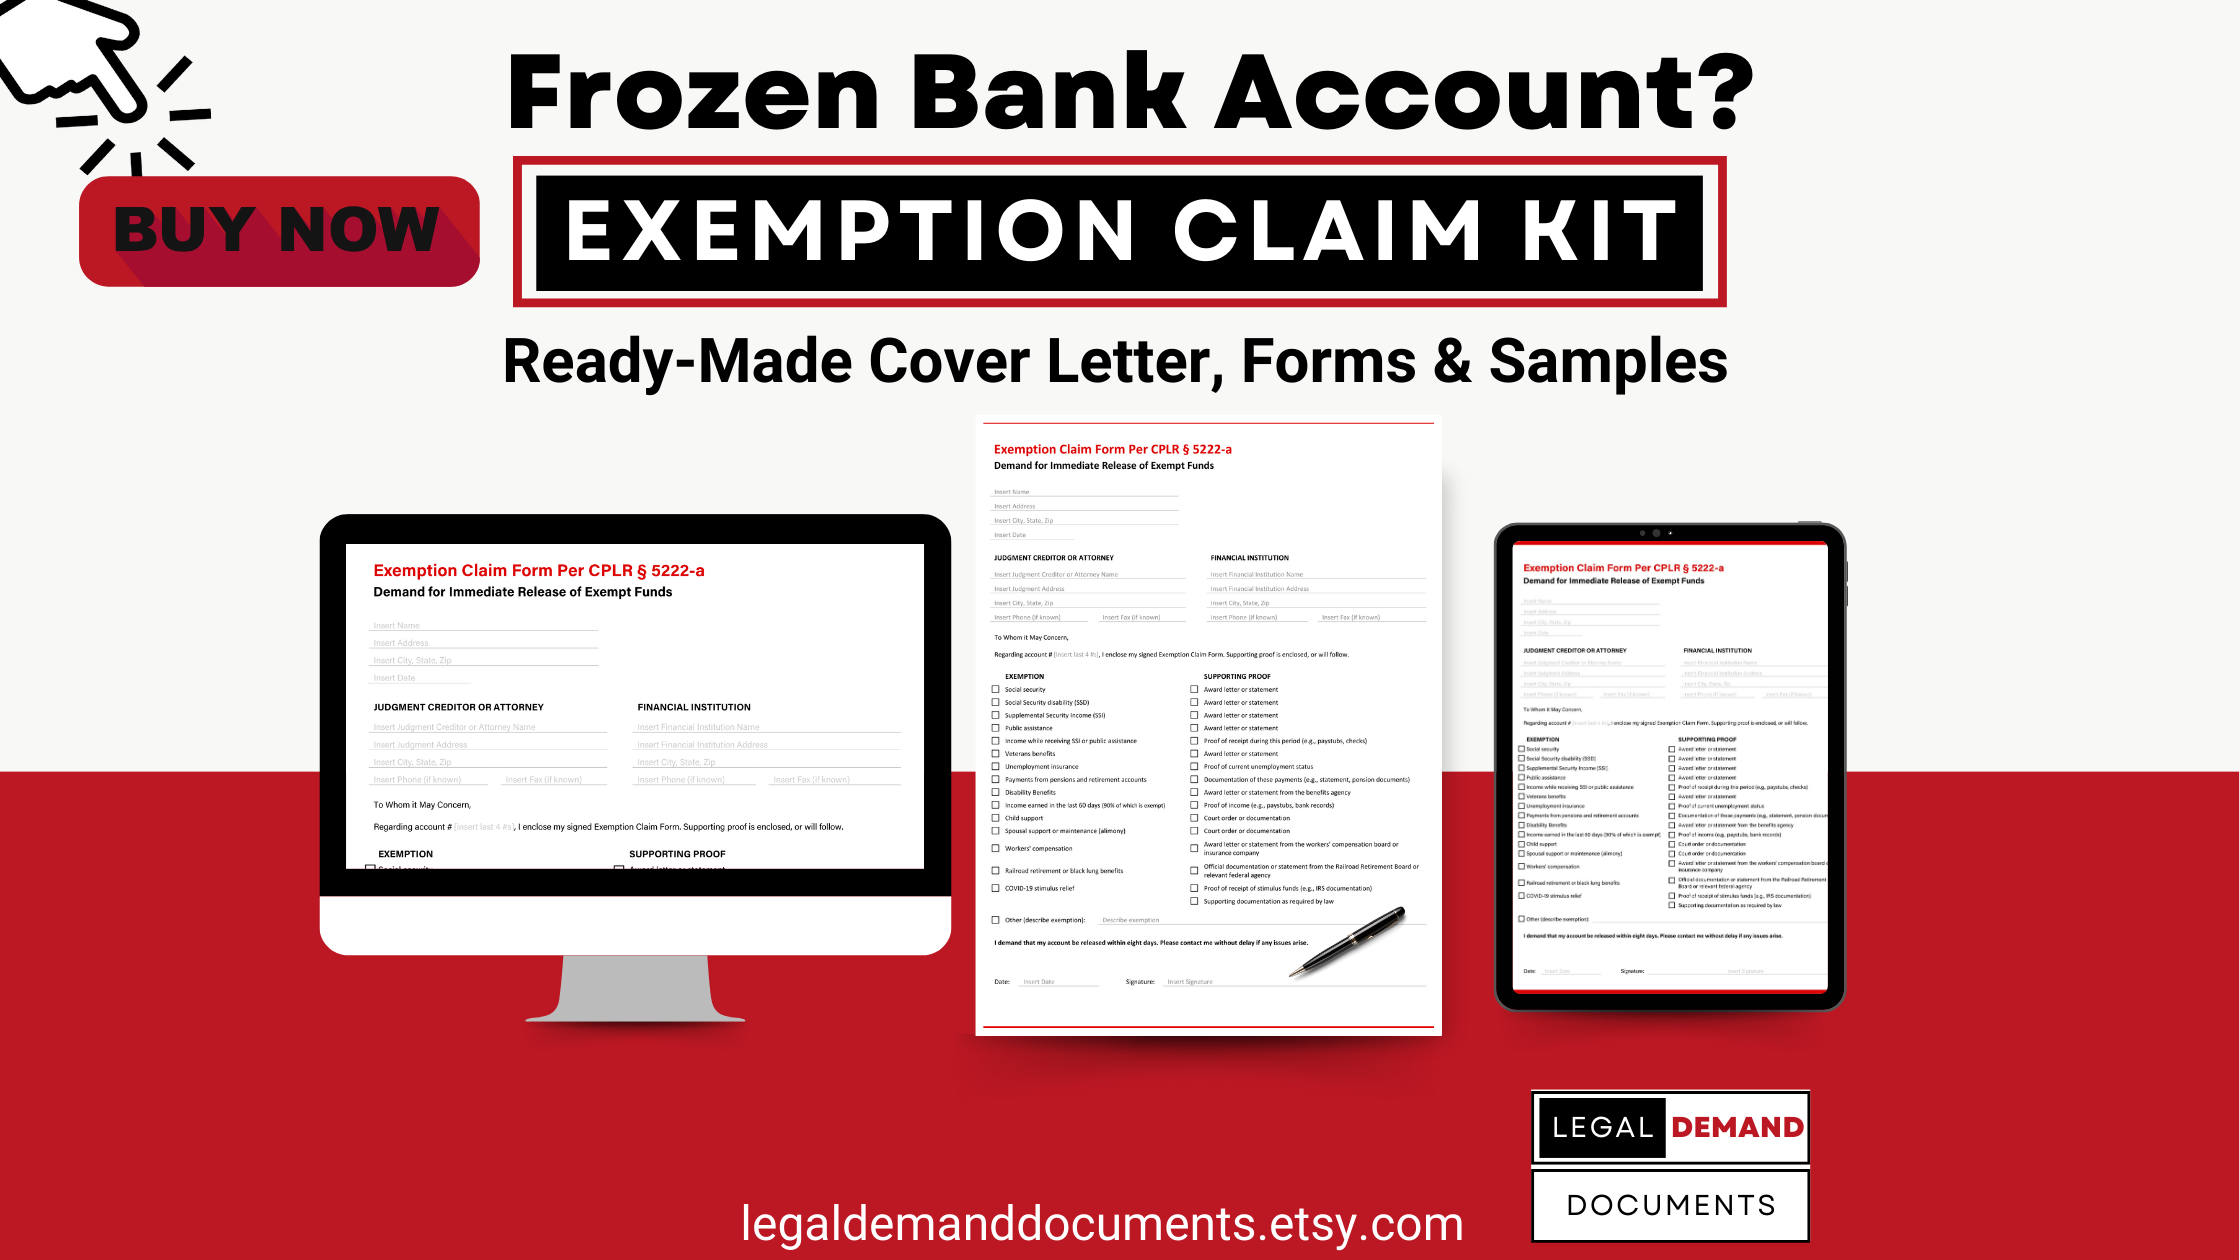 Exemption Claim Kit by The Langel Firm